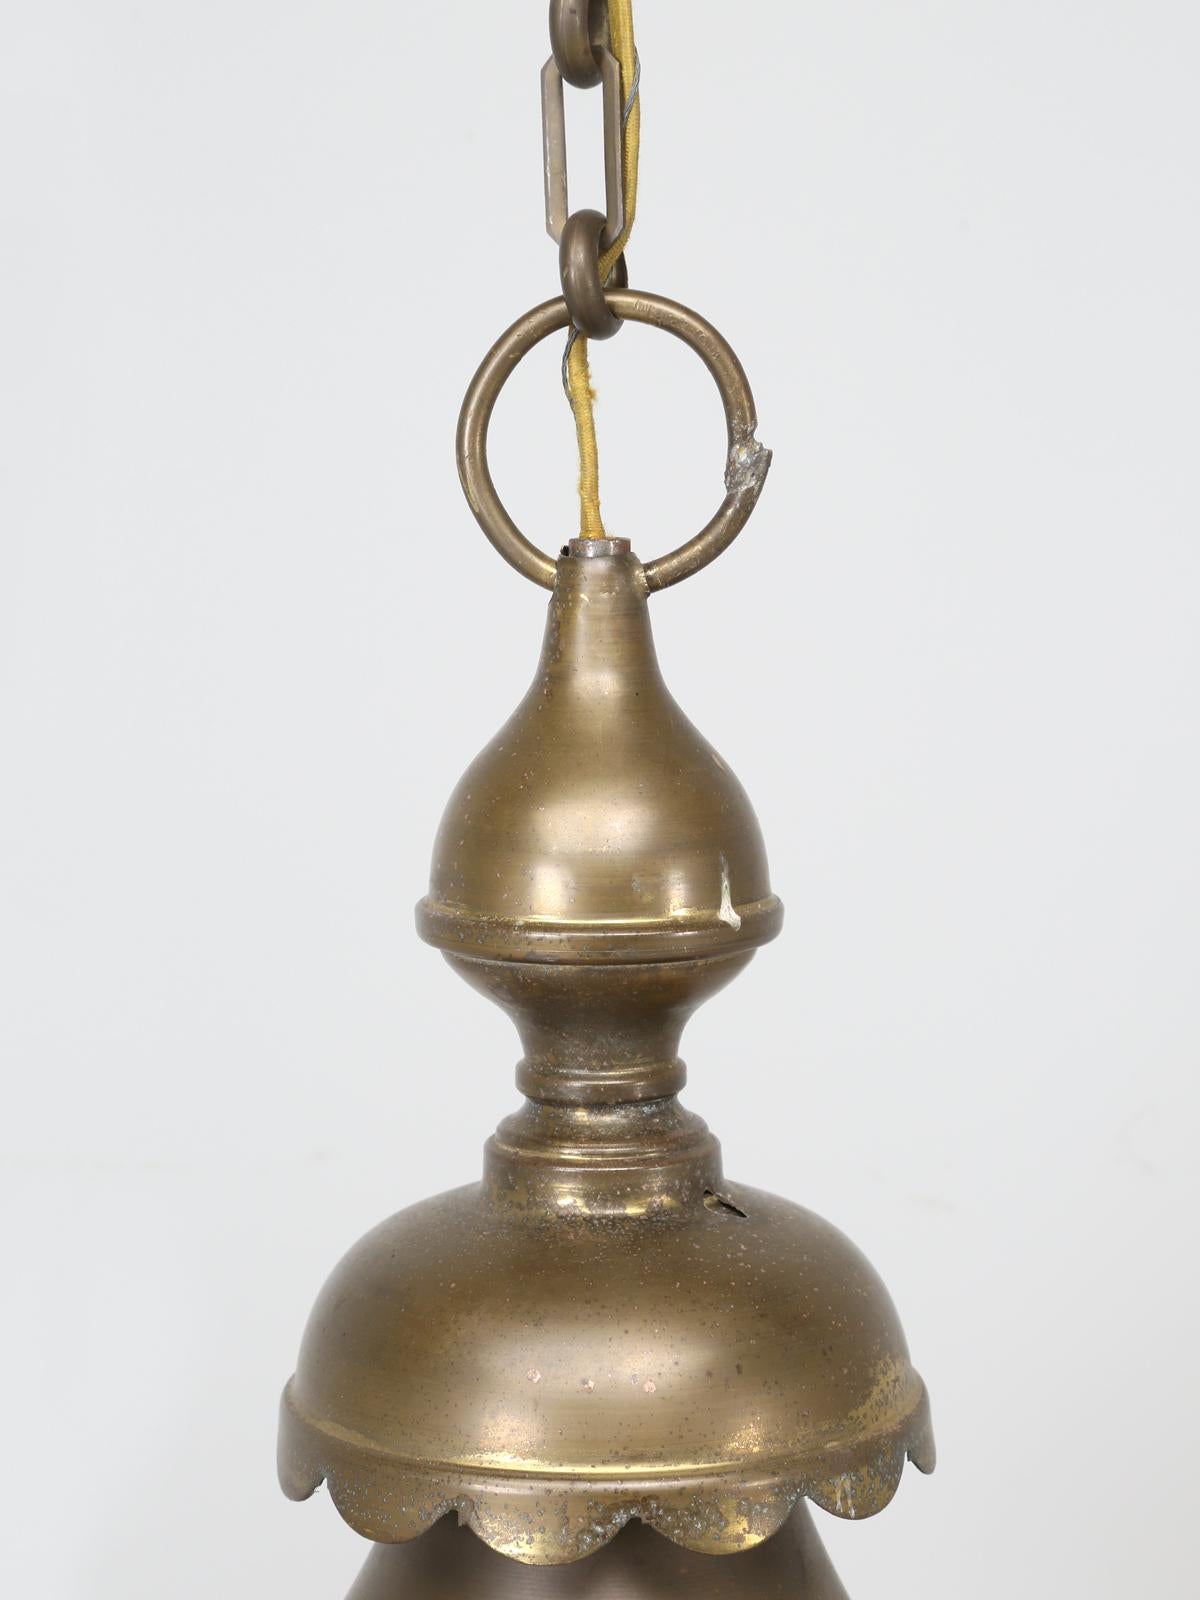 Hand-Crafted Antique Large Brass French or English Lantern, Fully Restored Old Glass For Sale